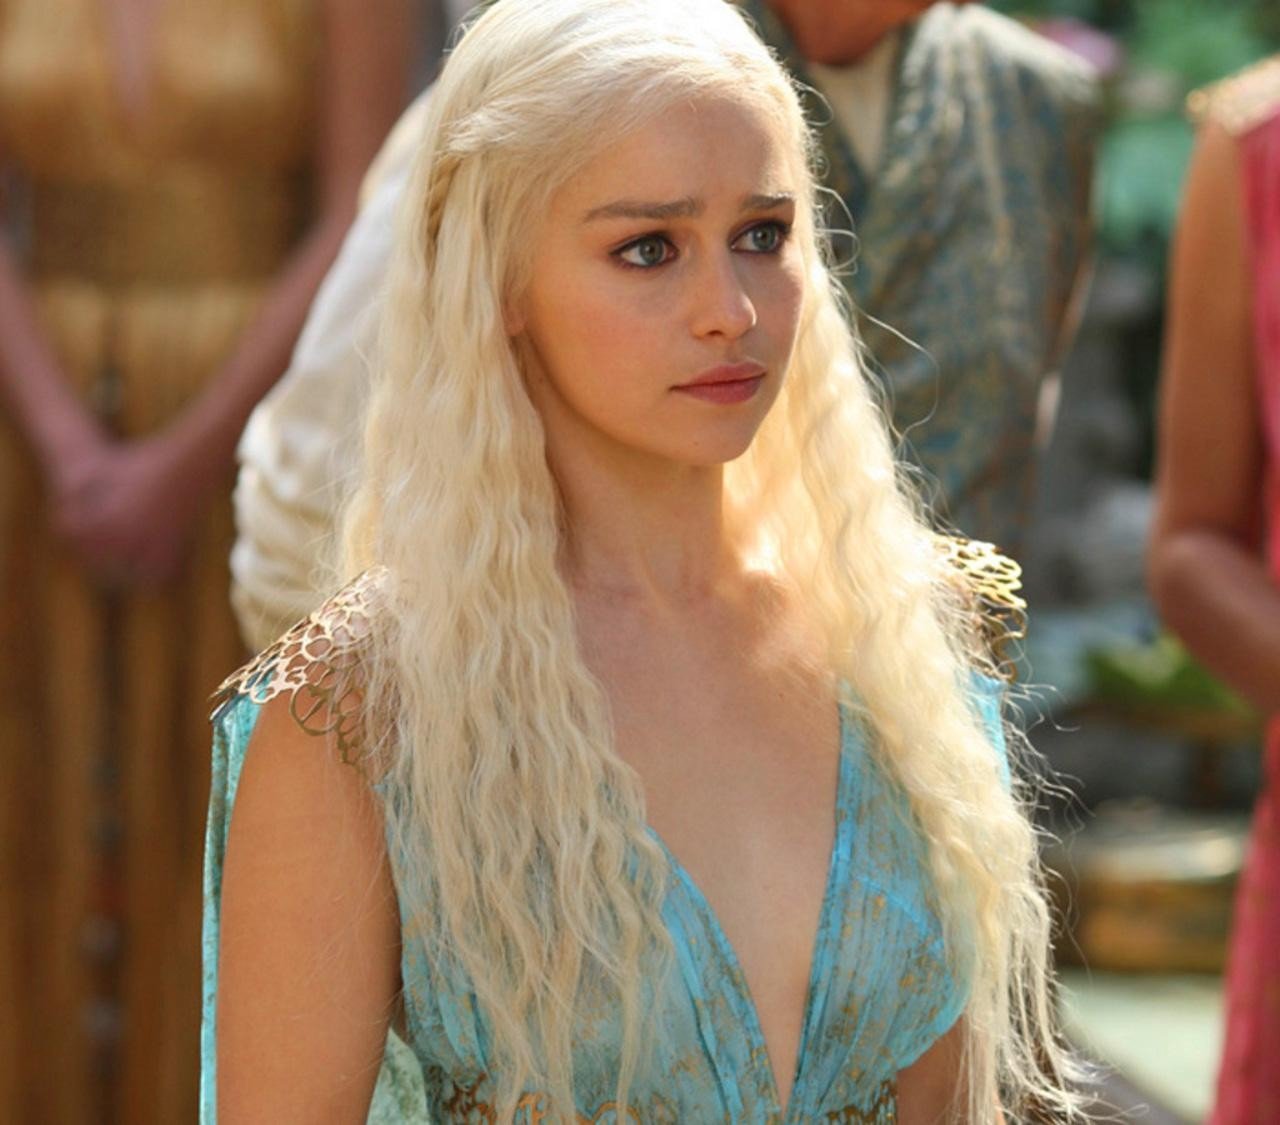 16 Sexy Women Girls On Game Of Thrones Hottest Tv Actress Reckon Talk